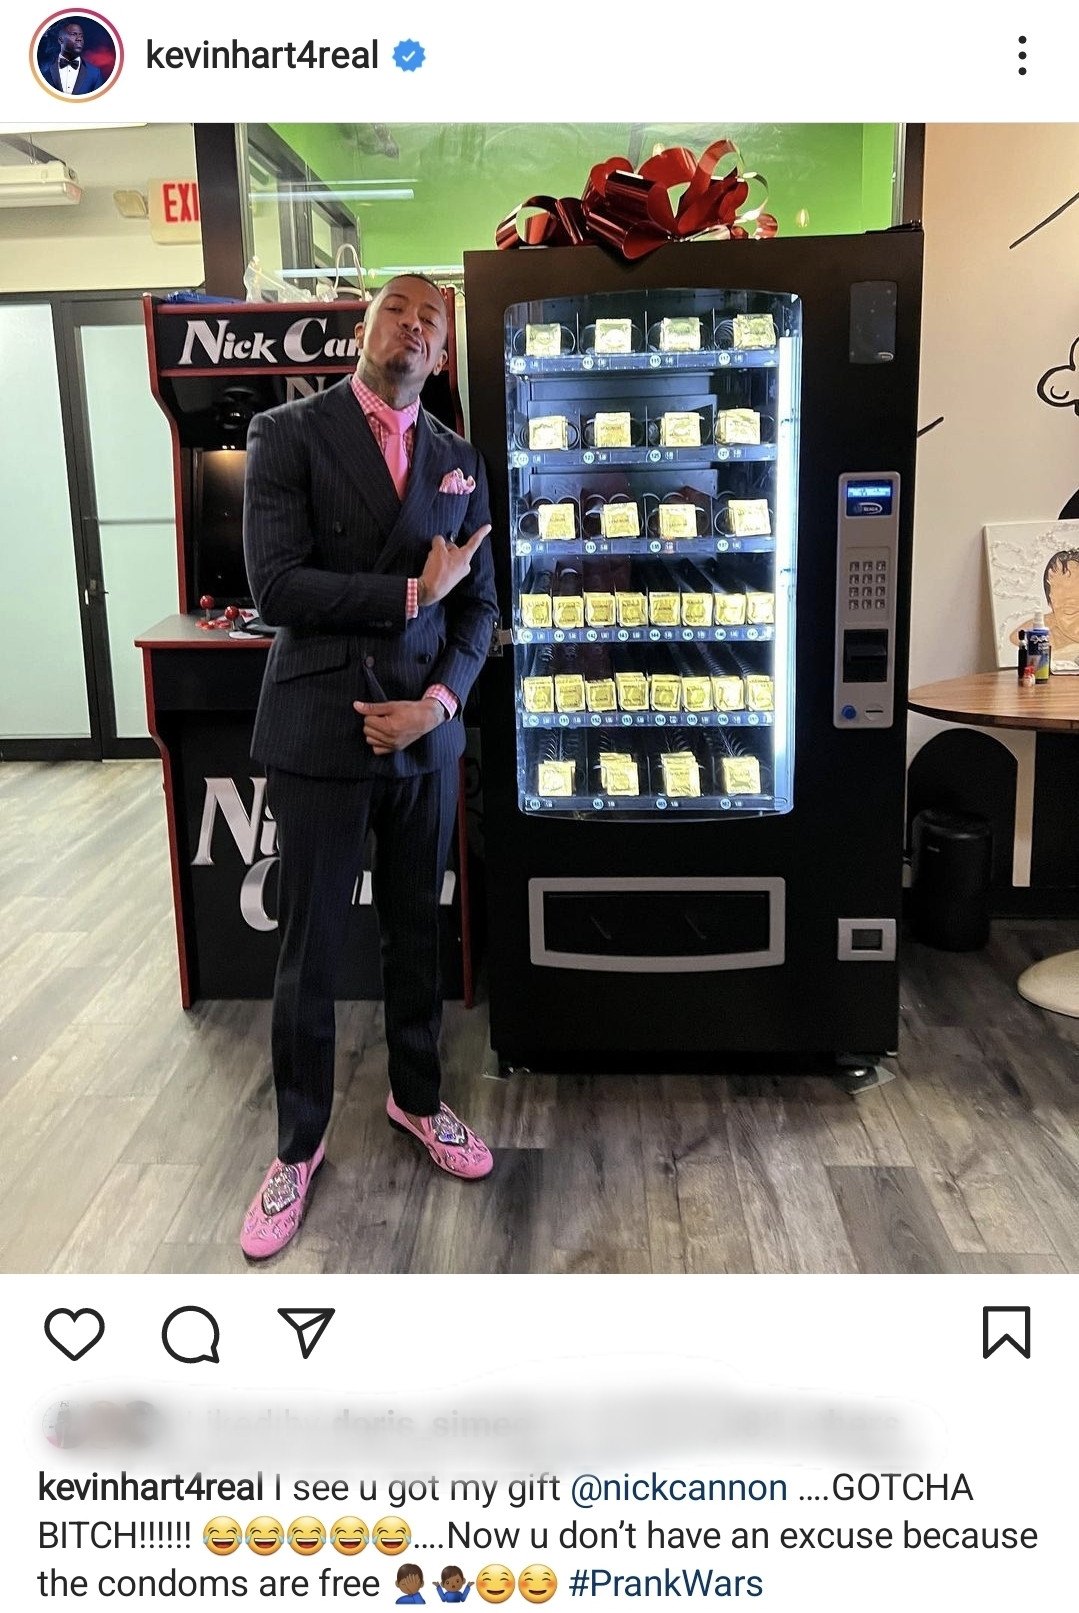 Kevin Hart sends Nick Cannon Vending Machine filled with Condoms following news he